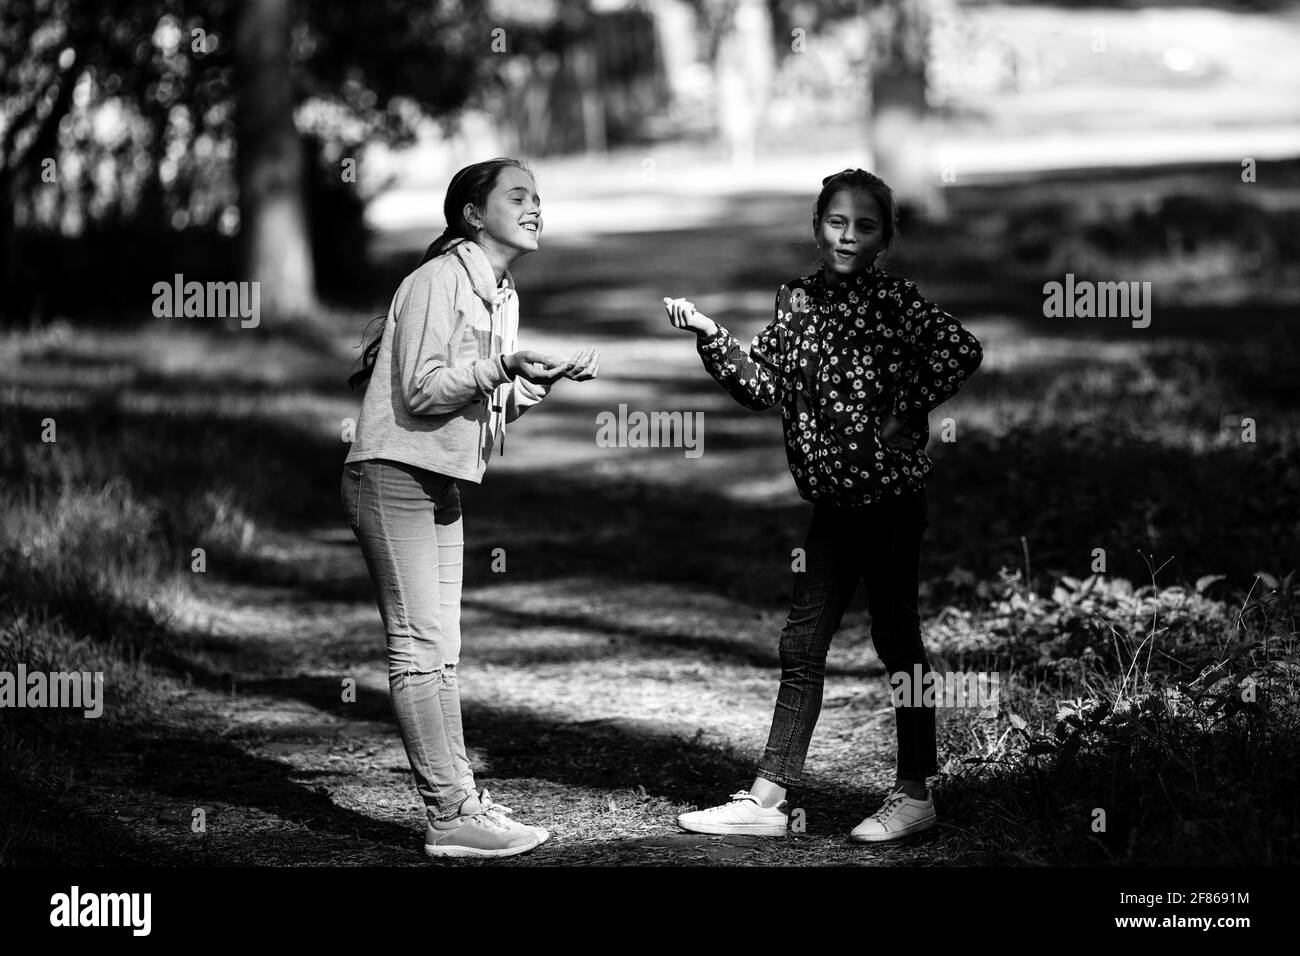 Two girls girlfriends are talking emotionally outdoors. Black and white photo. Stock Photo